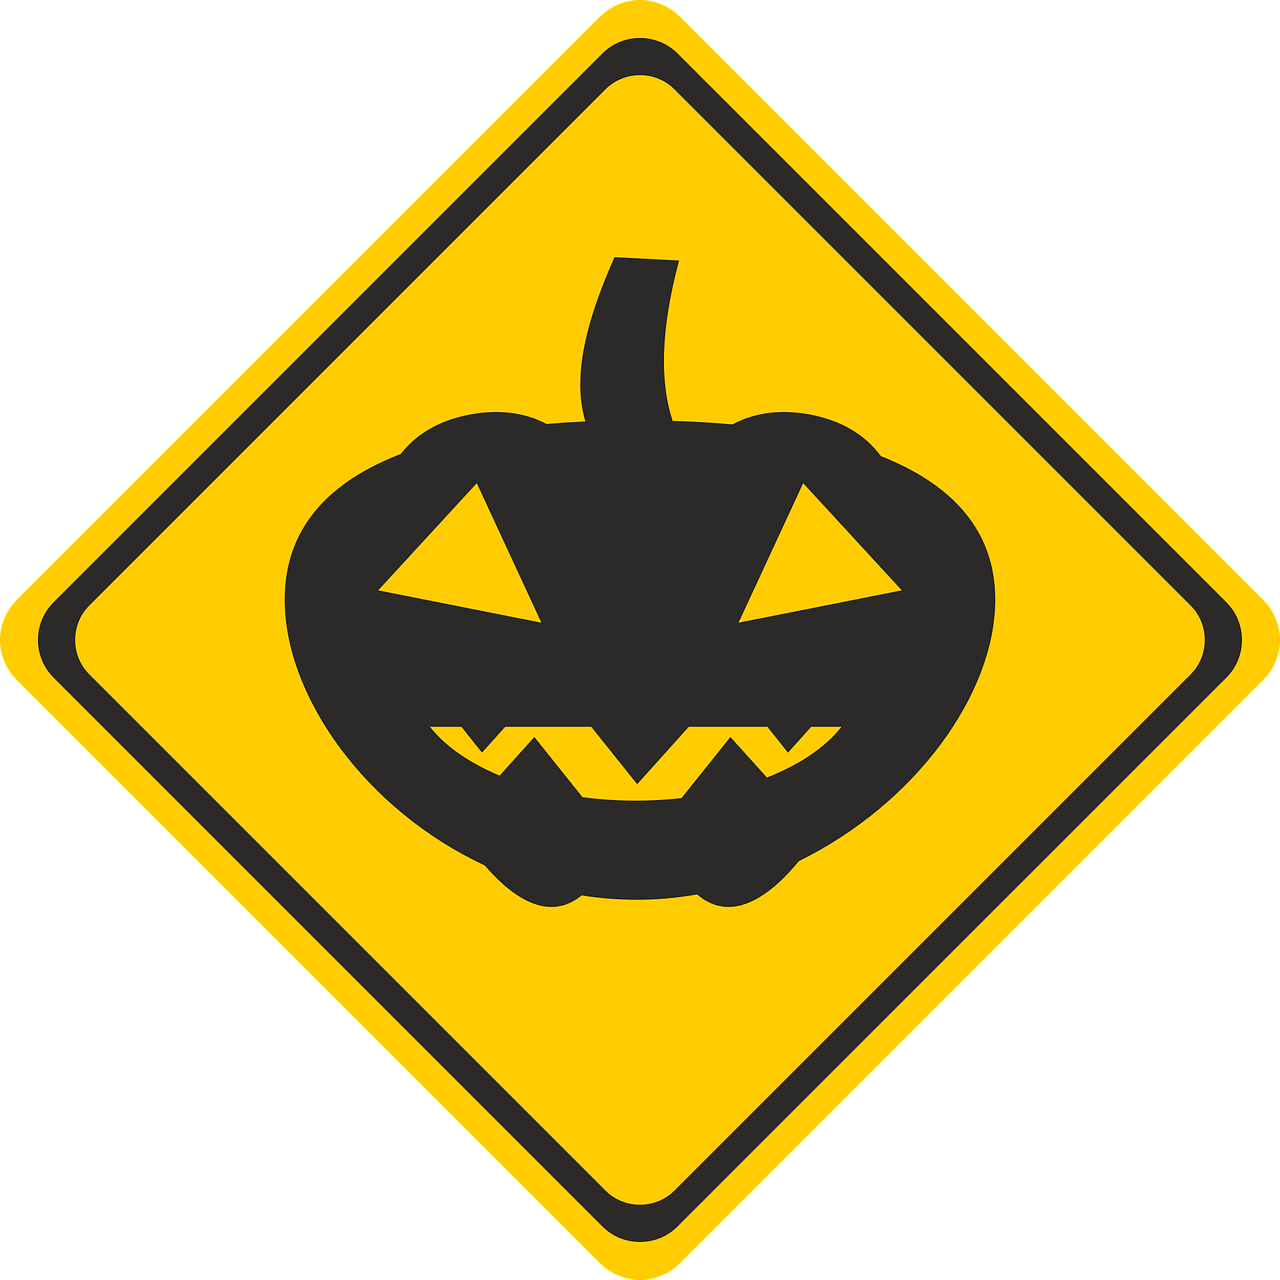 Preparing To Go Trick Or Treating, Take These Safety - Public Works Sign (1280x1280)